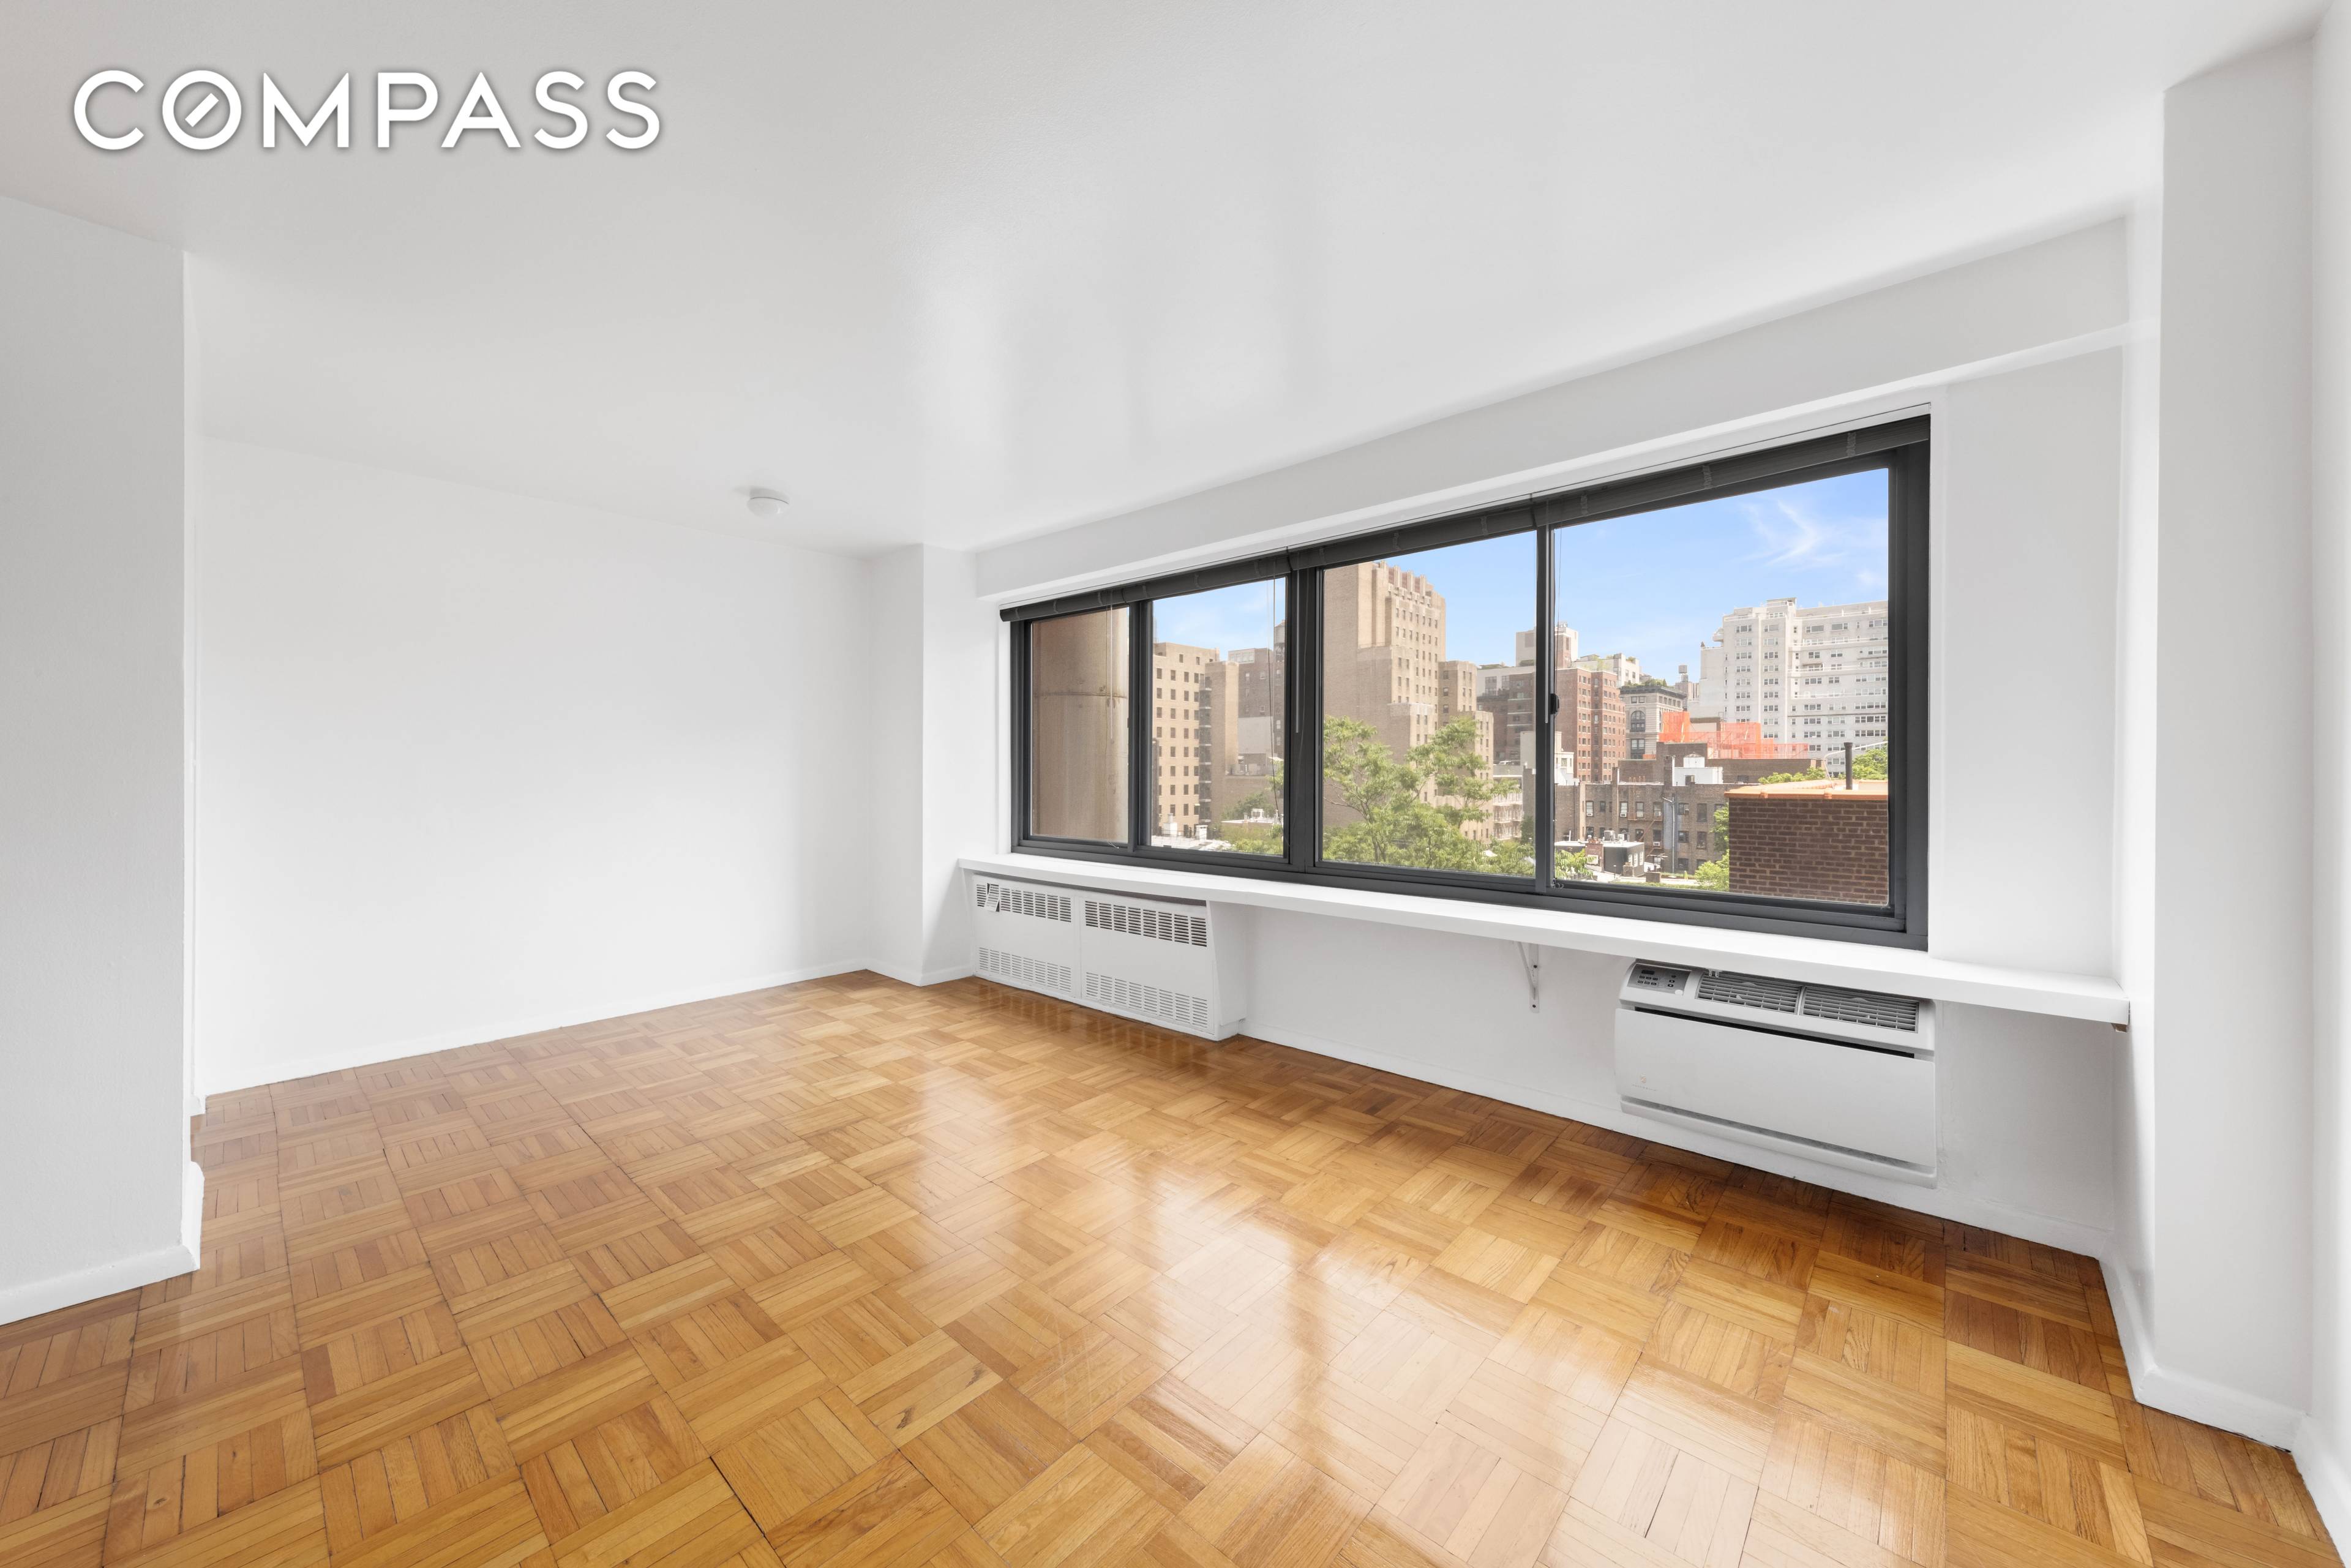 One of a kind opportunity to purchase two adjacent units 9L and 9M at the exclusive full service 175 West 12th Street condominium.